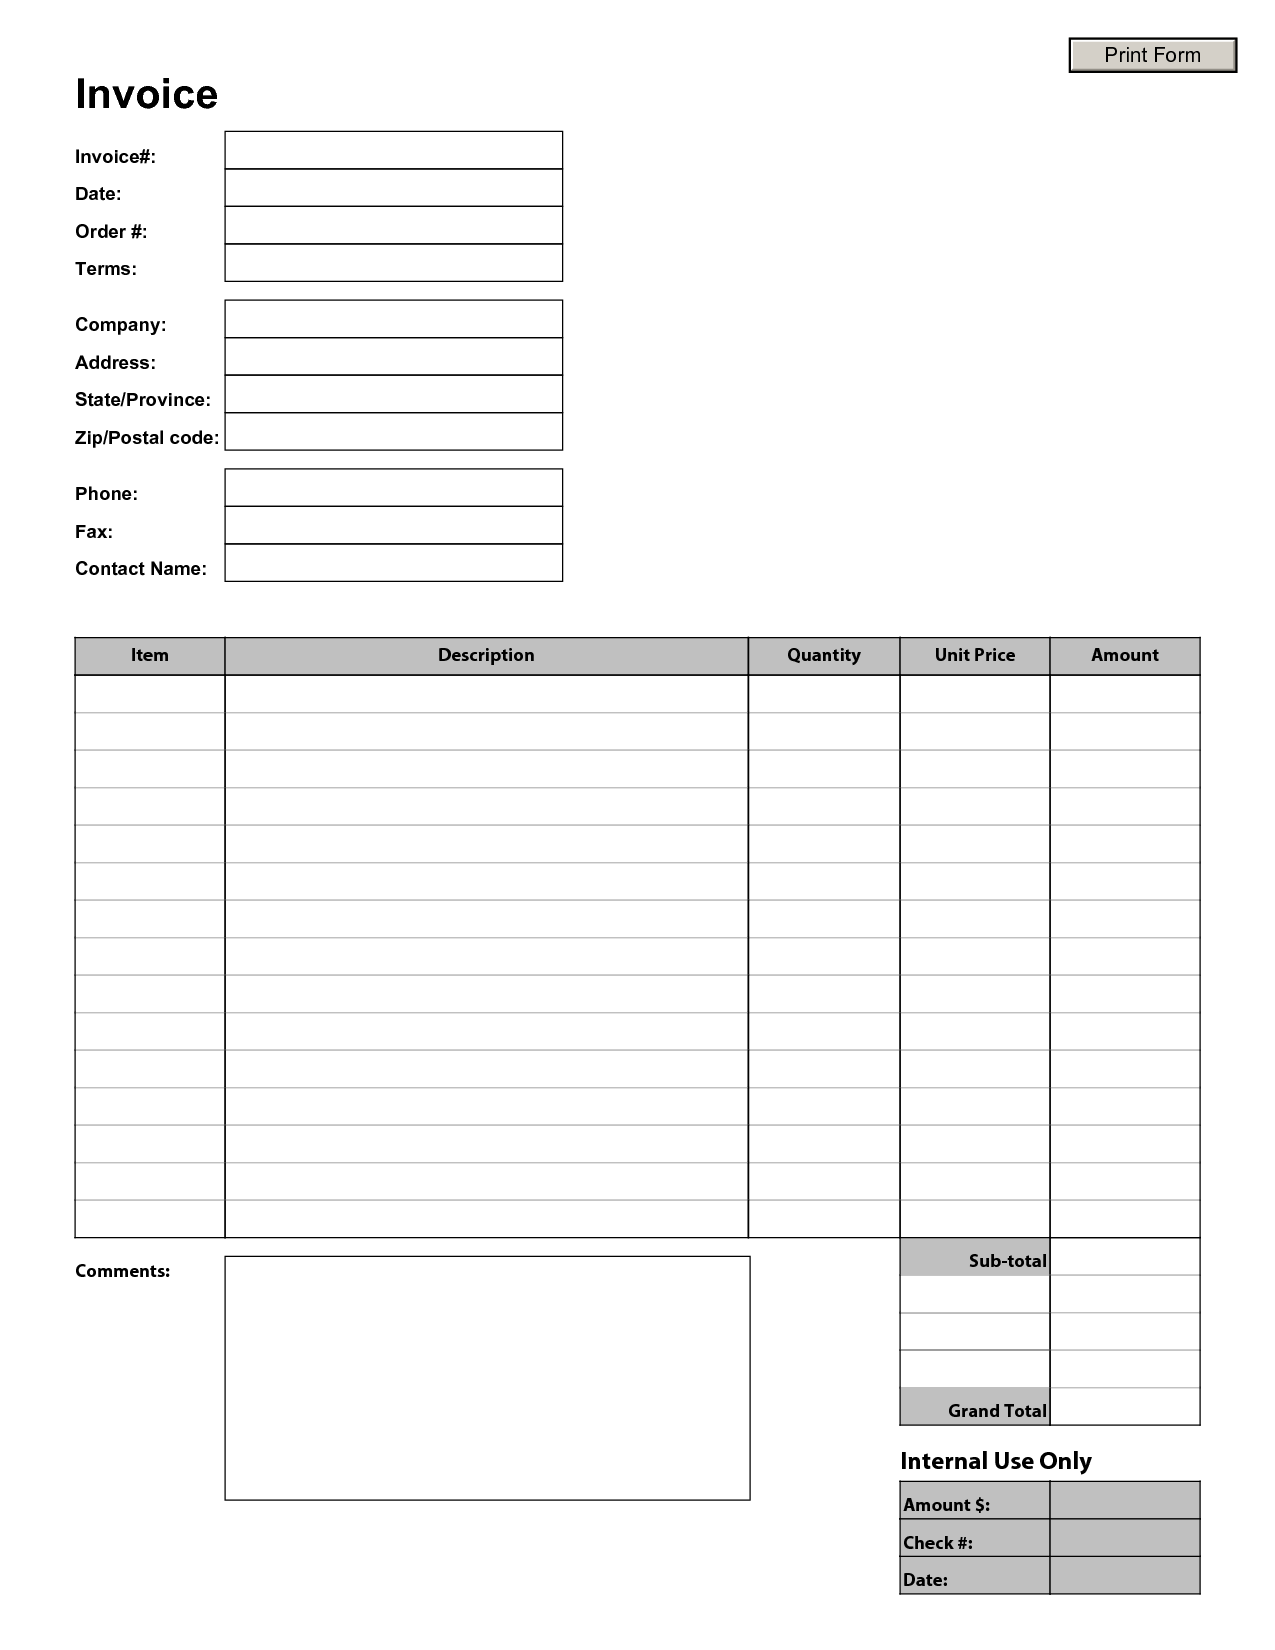 Blank Invoice To Print | free to do list